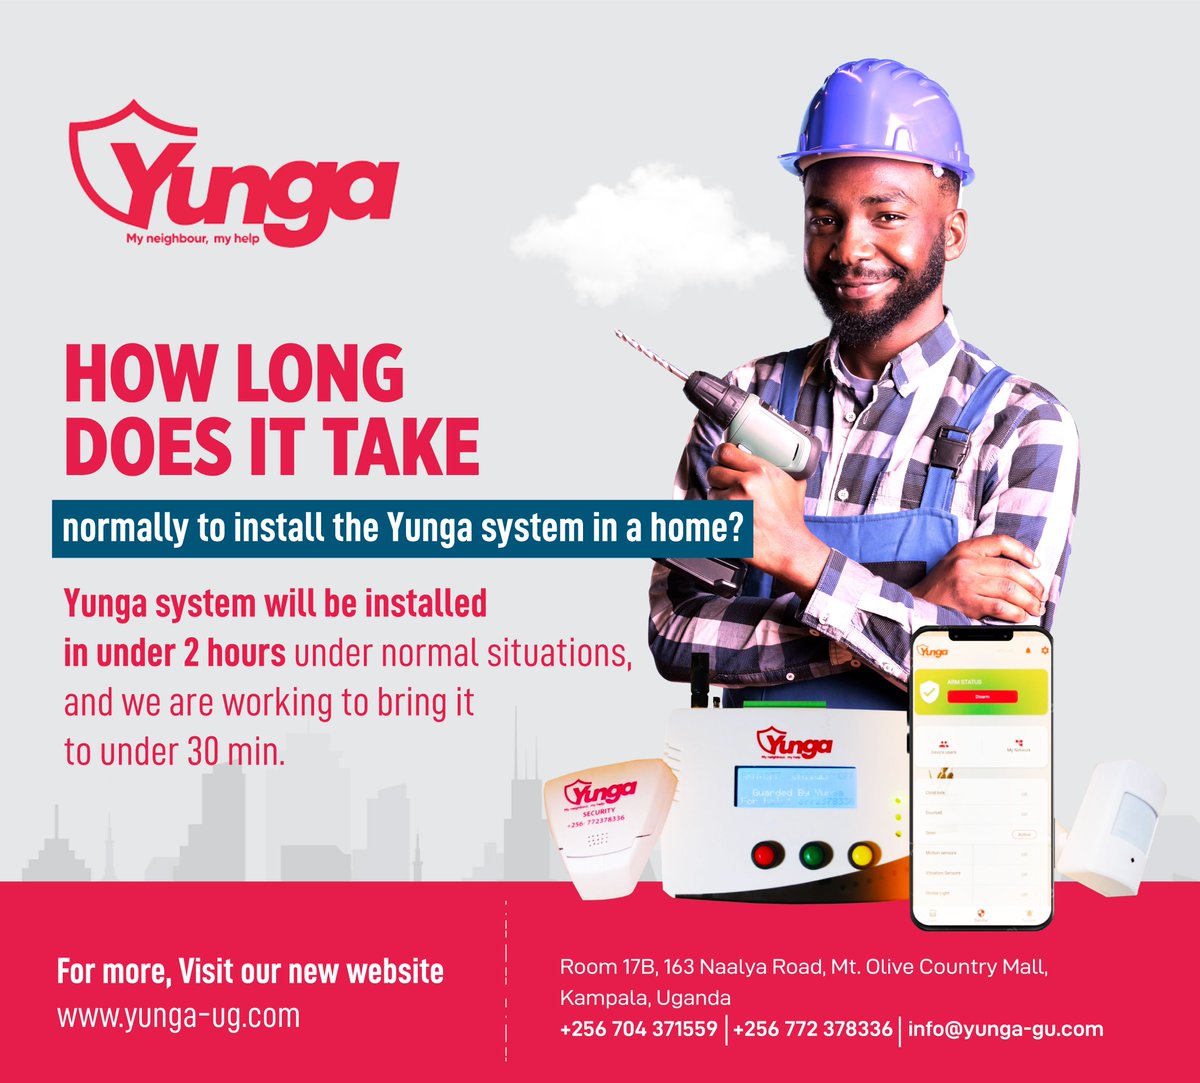 Back to addressing some of your questions: How long does it take normally to install the Yunga system in a home? Yunga system will be installed in under 2 hours in normal situations, and we're working to bring it 30 min. For more information, visit: yunga-ug.com